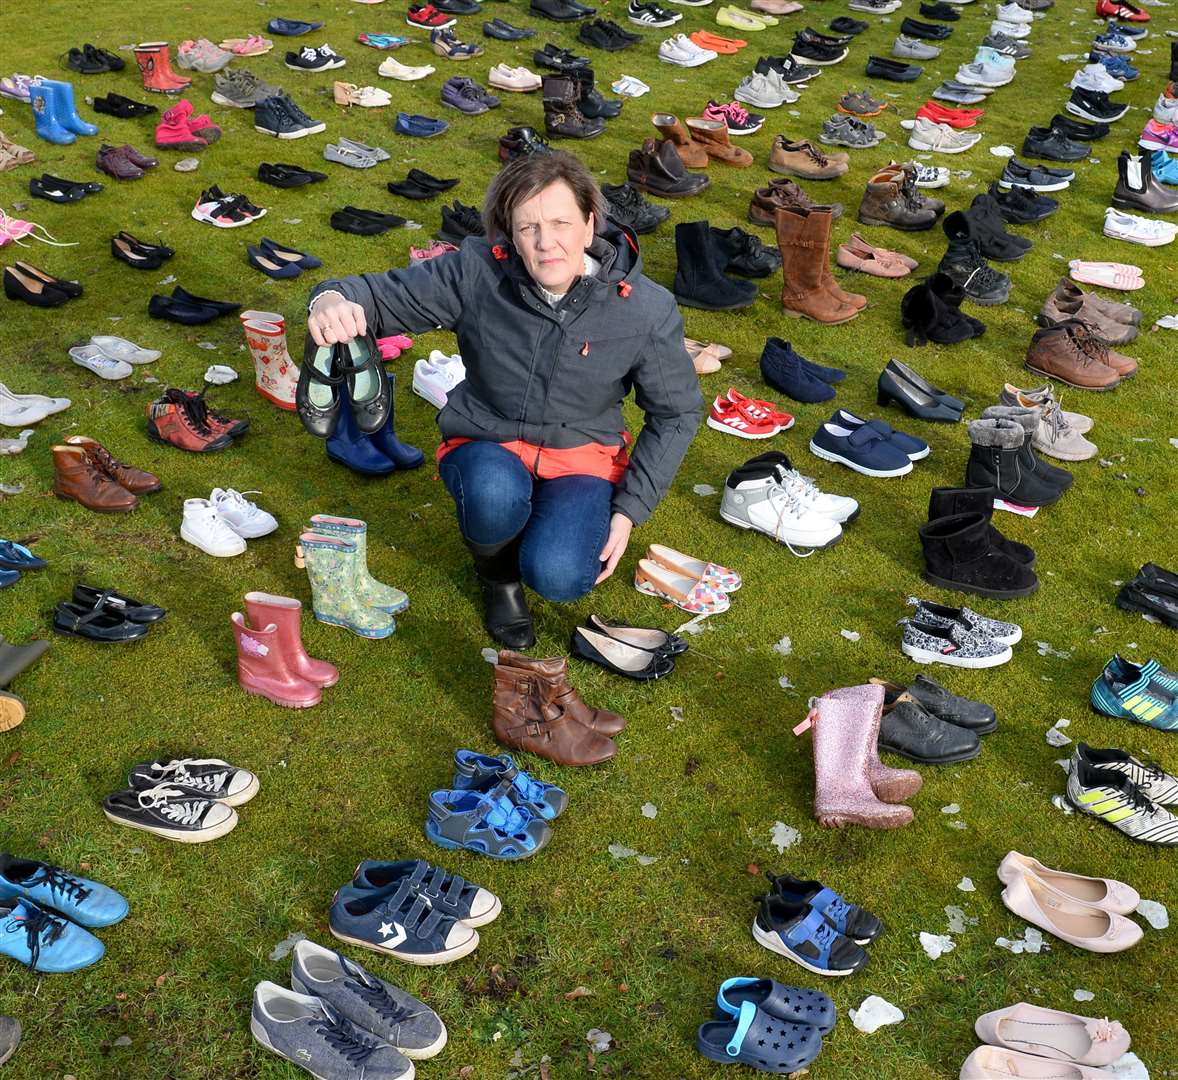 Highland Action Group's Barbara Irvine with 230 pairs of shoes, representing the number of children who will not be at school if cuts go ahead.